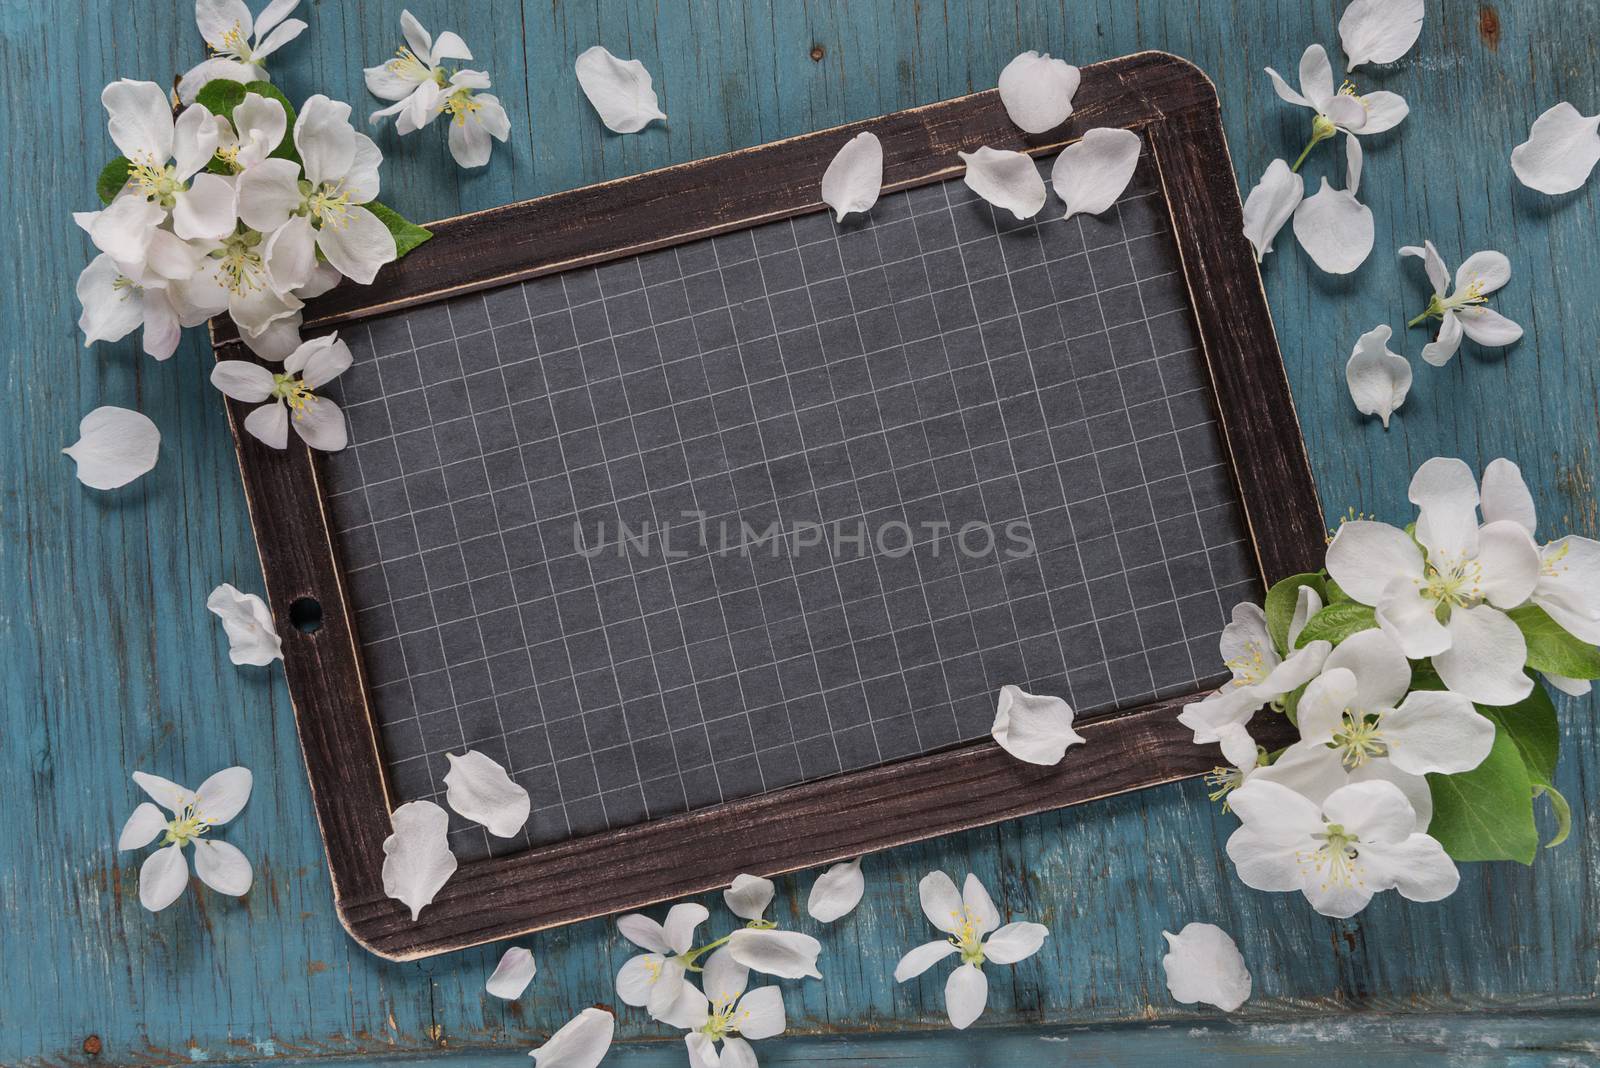 Vintage blank chalkboard or school slate is on an old blue rustic wooden background with white apple flowers, with space for text or message